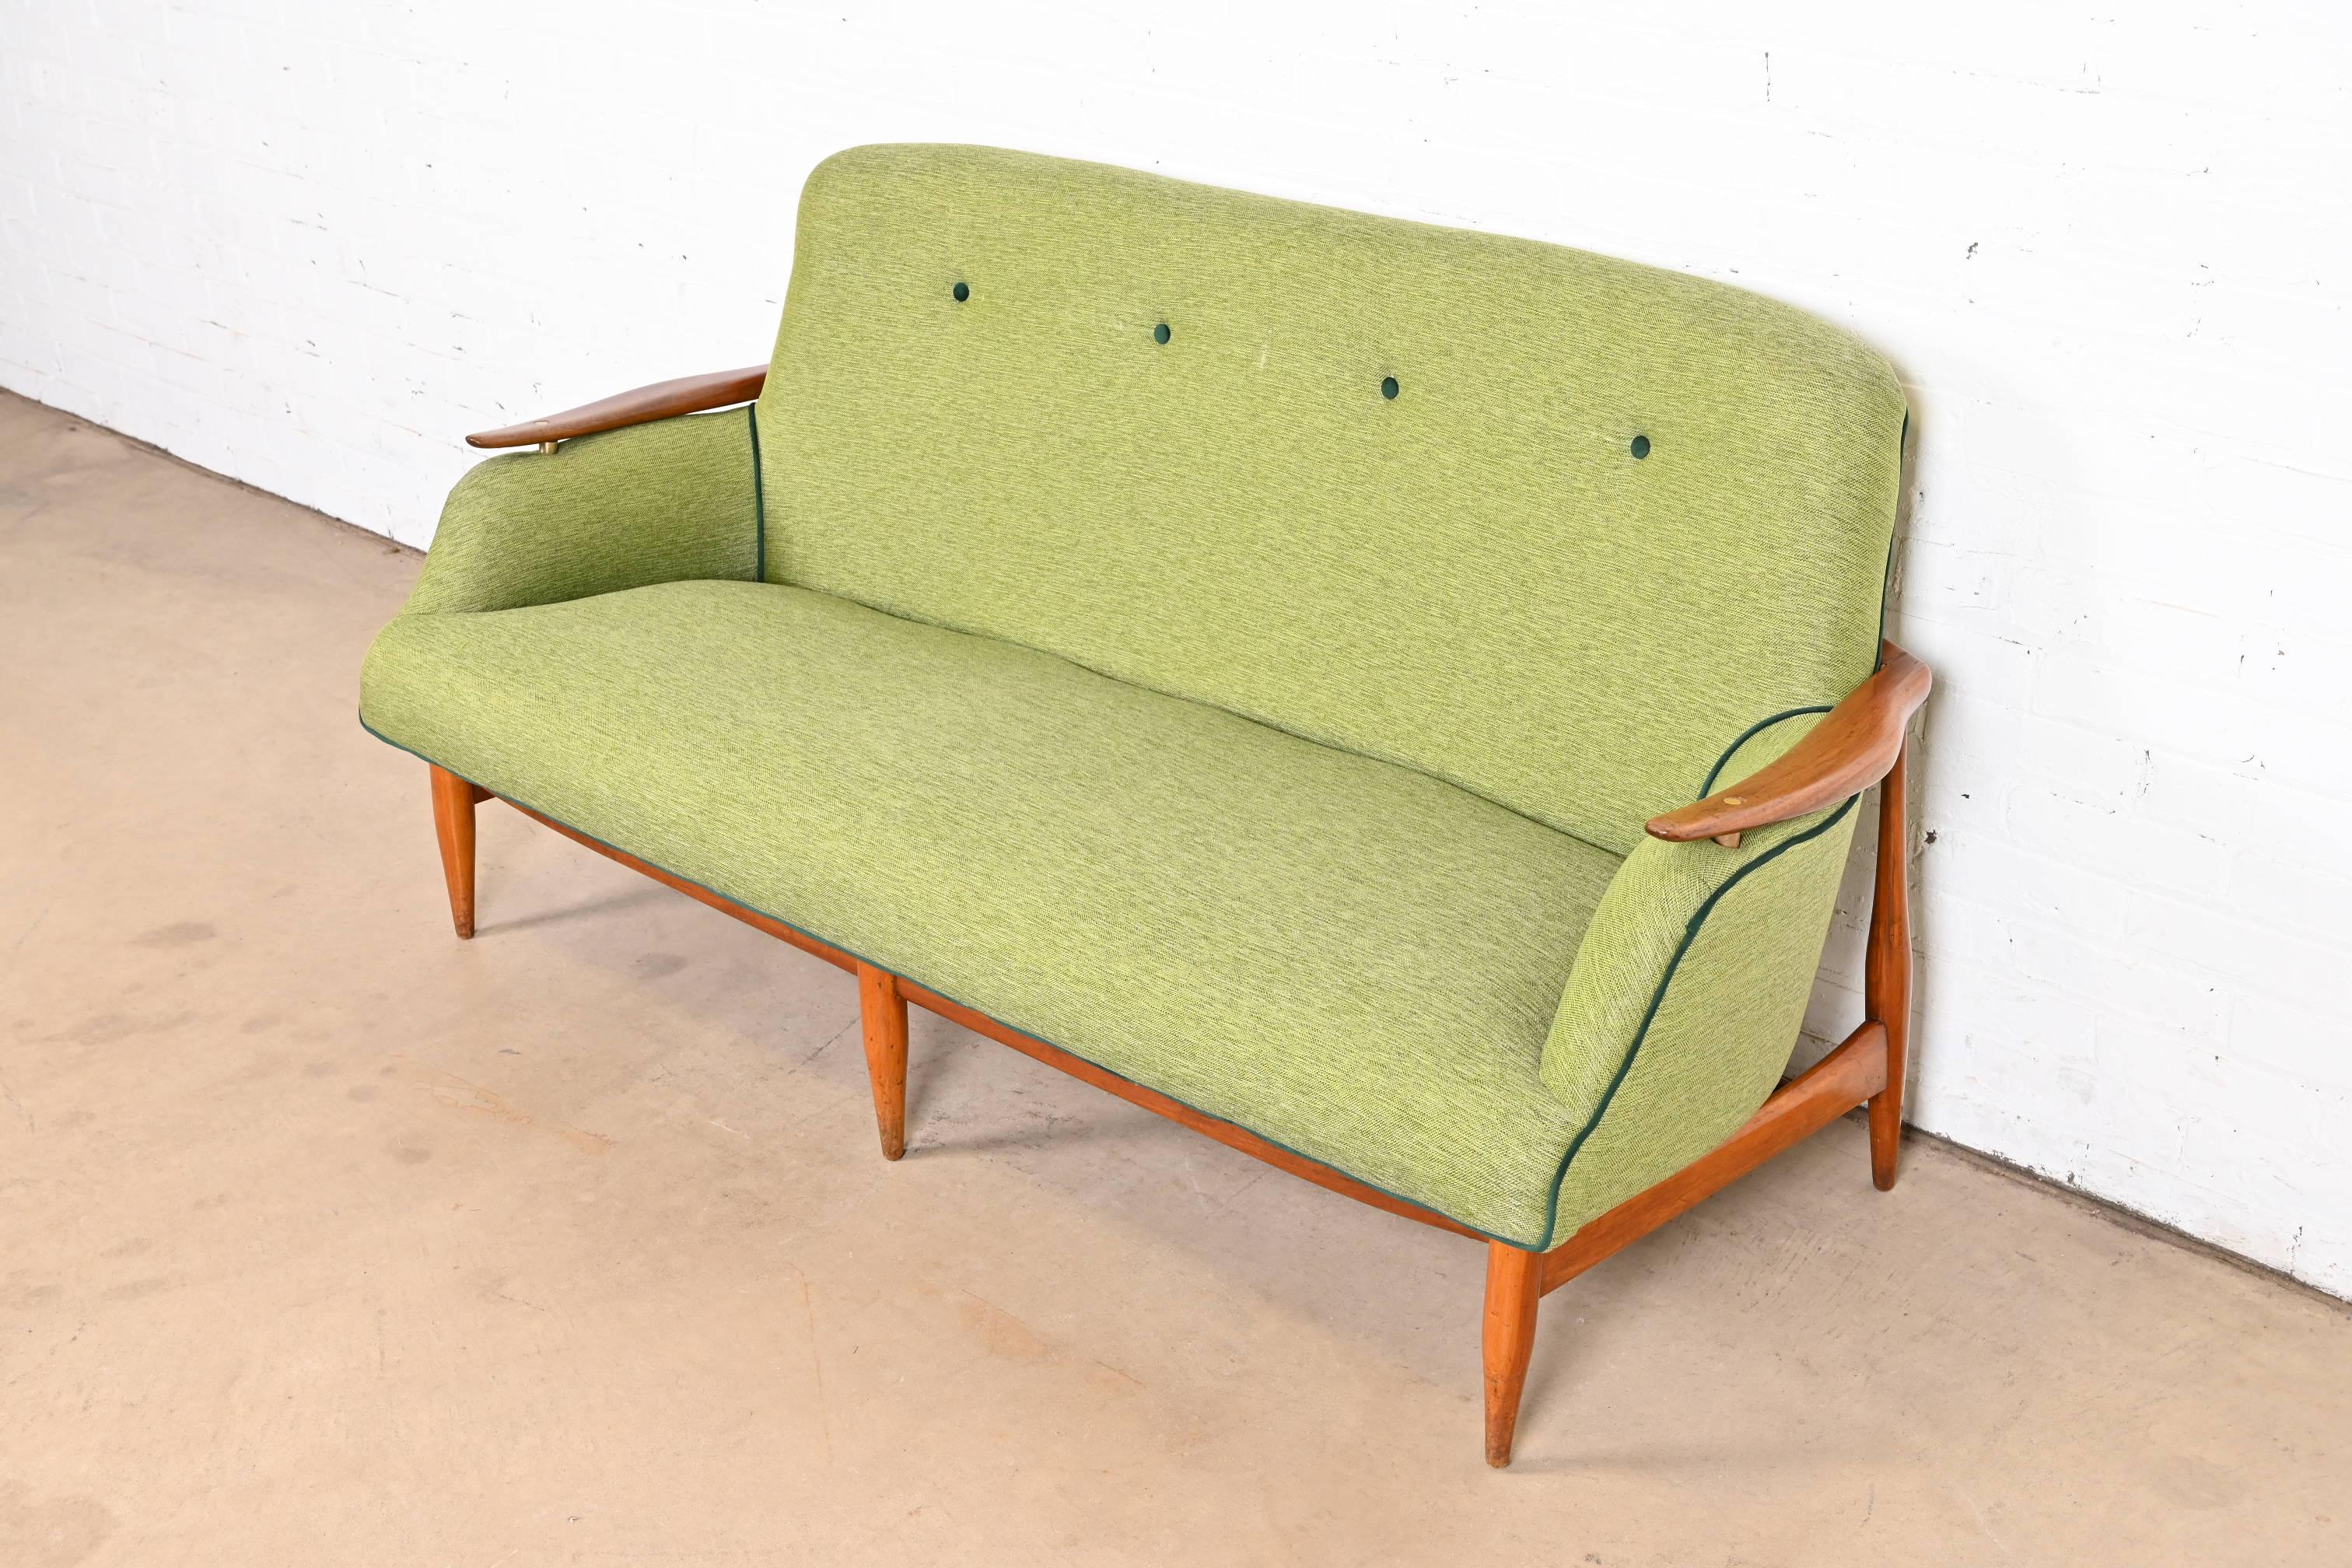 Finn Juhl Danish Modern Upholstered Sculpted Teak Sofa, 1950s In Good Condition For Sale In South Bend, IN